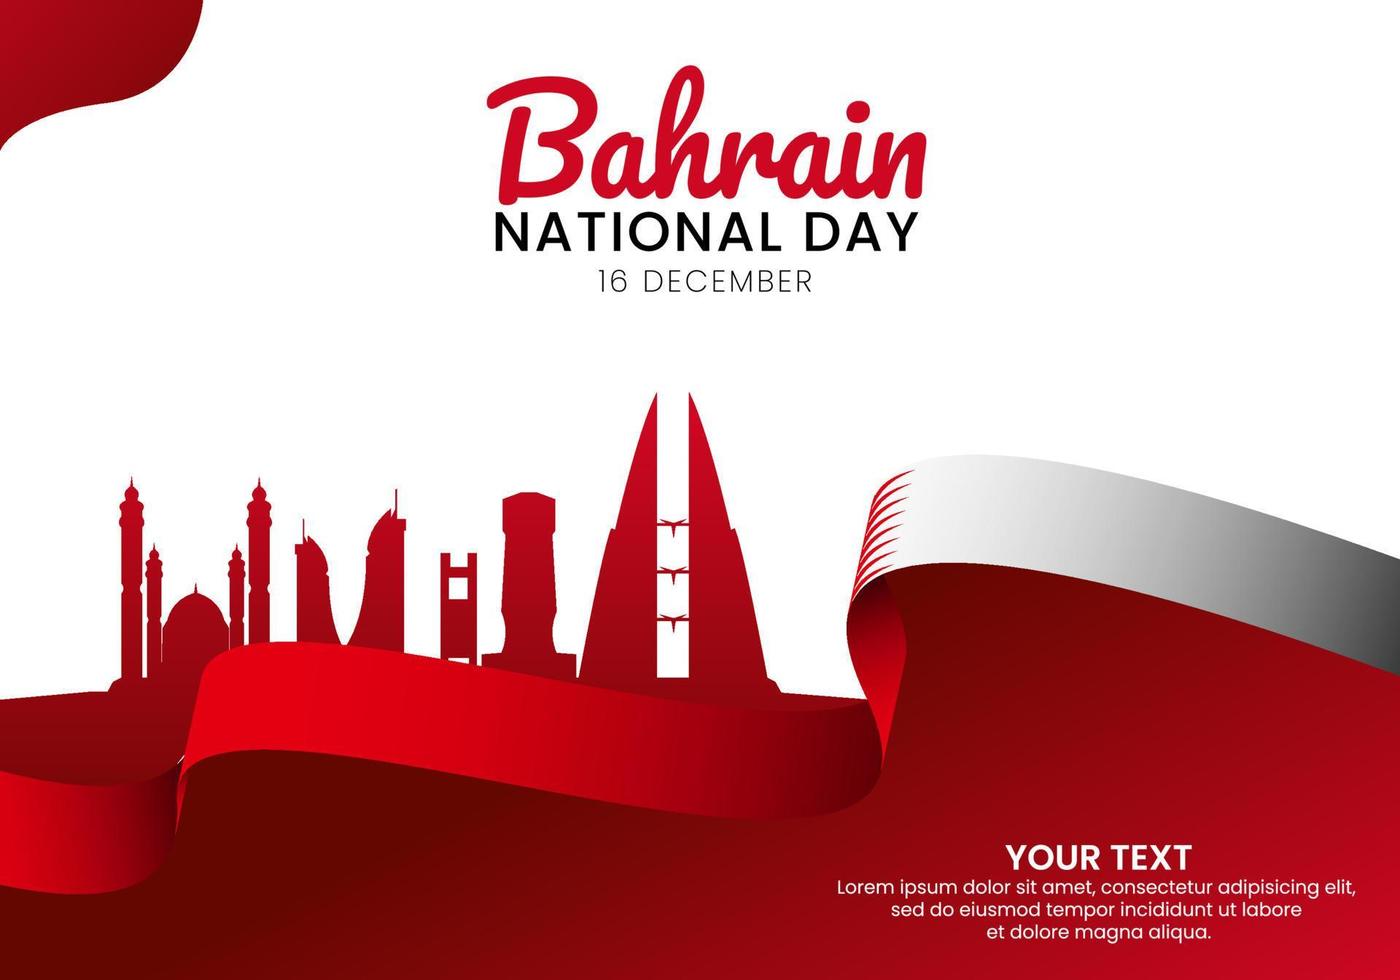 Bahrain national independence day greeting card vector illustration